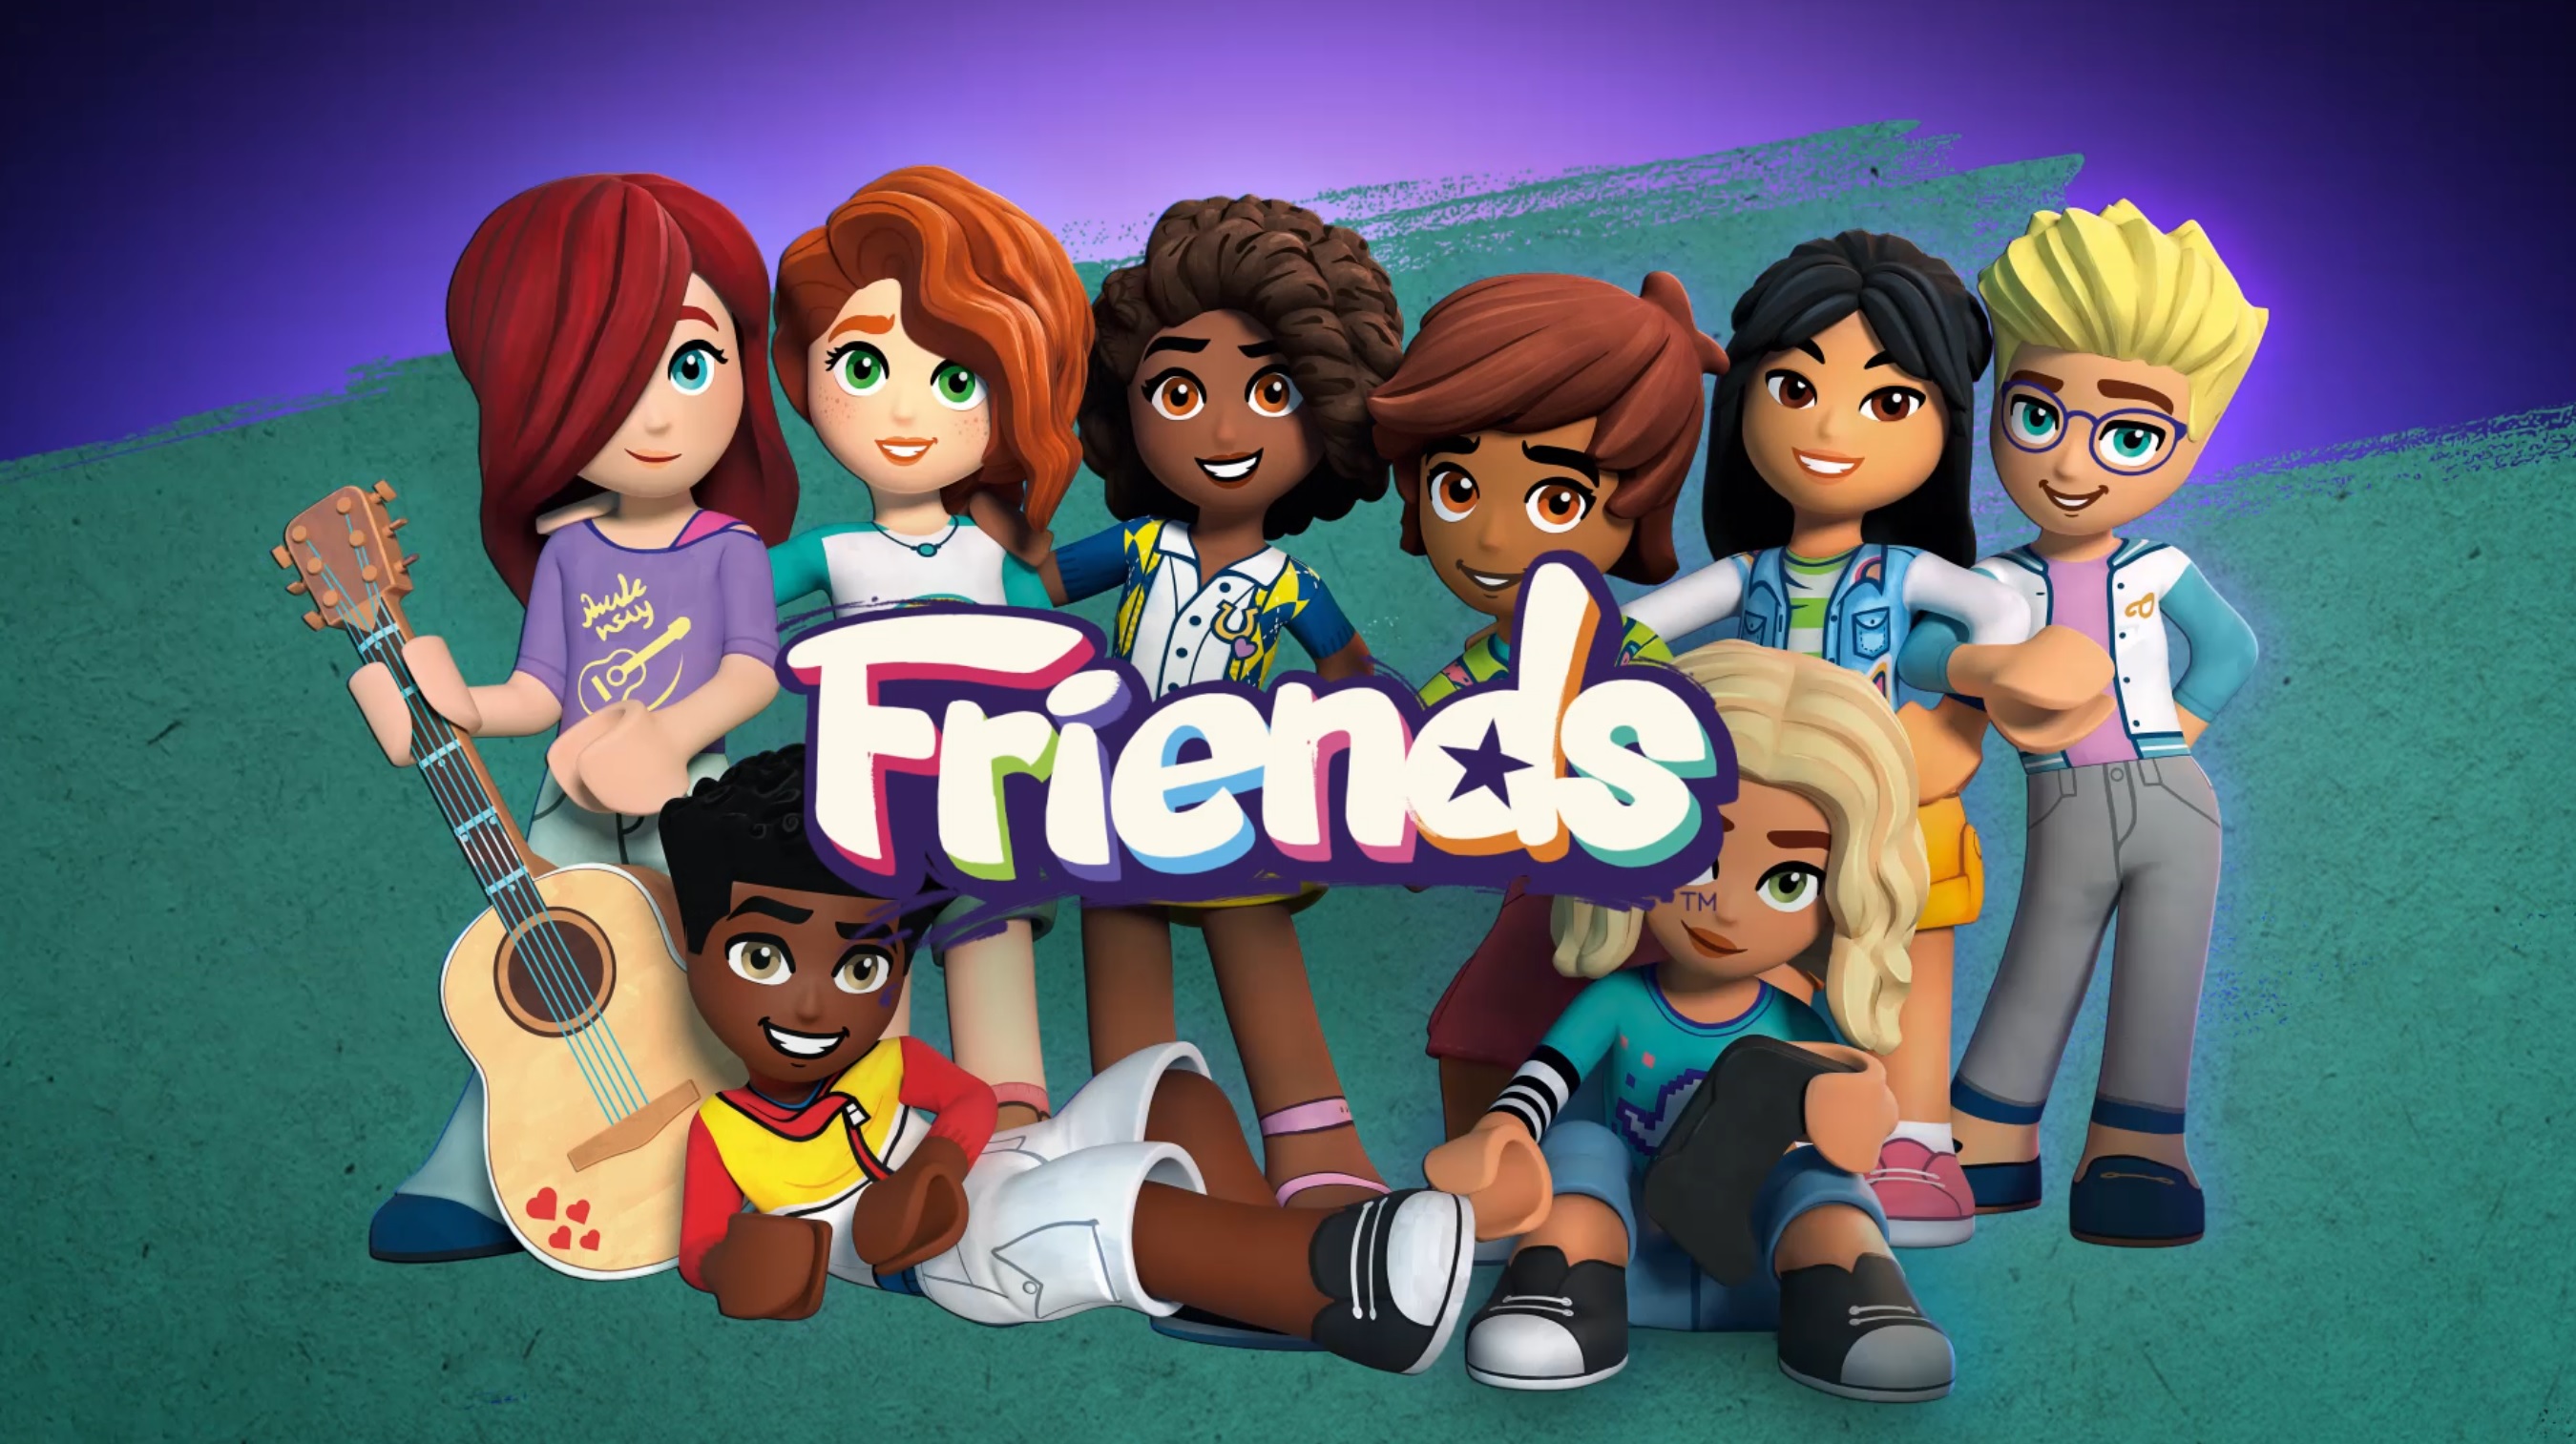 Lego Friends: The Next Chapter: New Beginnings